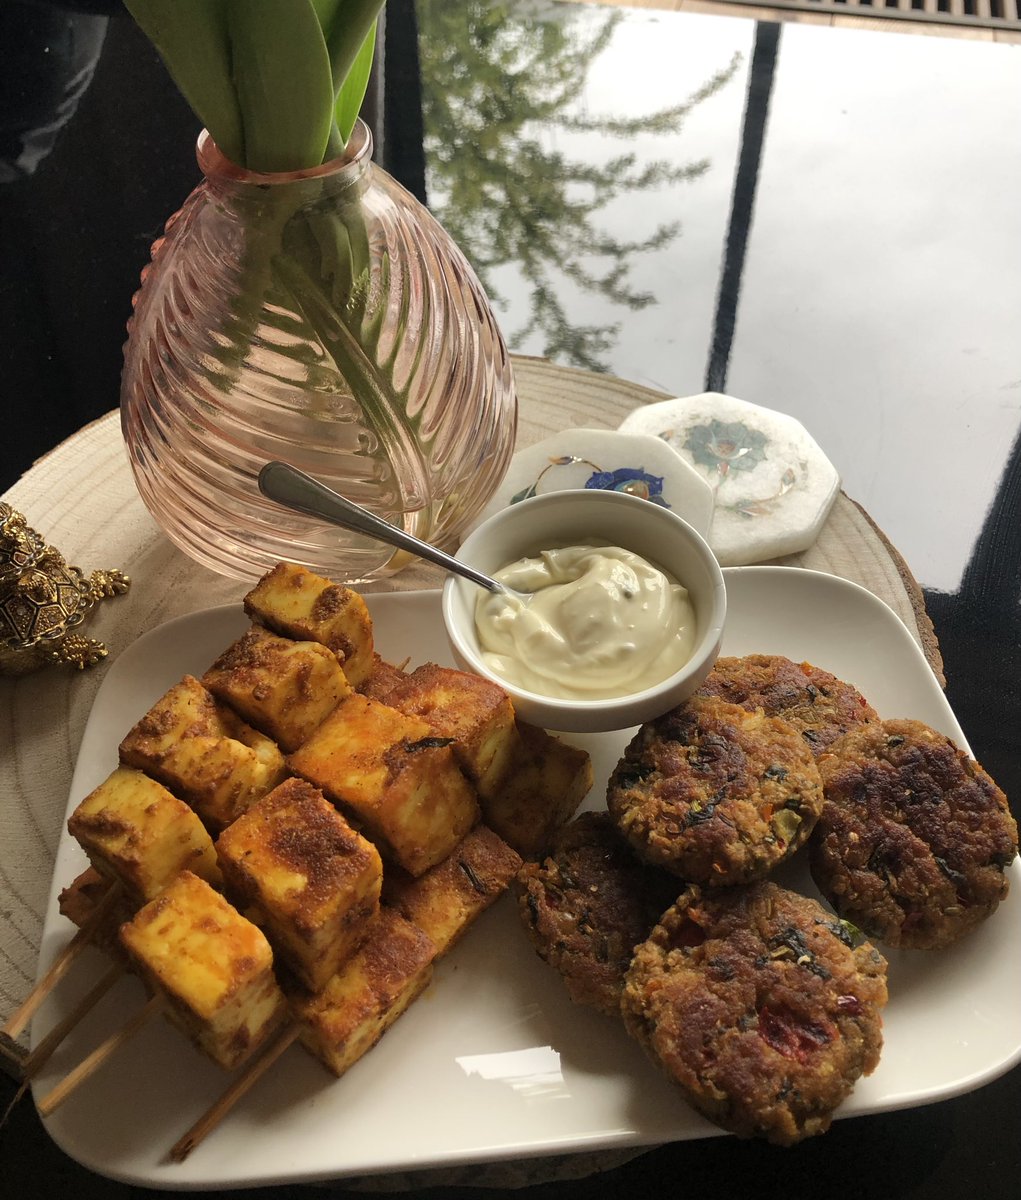 Who says vegetarian food can't be delicious? Grilled Paneer skewers and plant based chickpeas kebabs make the perfect protein-packed combo!🍢🍢 Meatless Monday , healthy, hearty and oh-so-tasty. #mondayvibes #meatlessmonday #hearty #appetizers